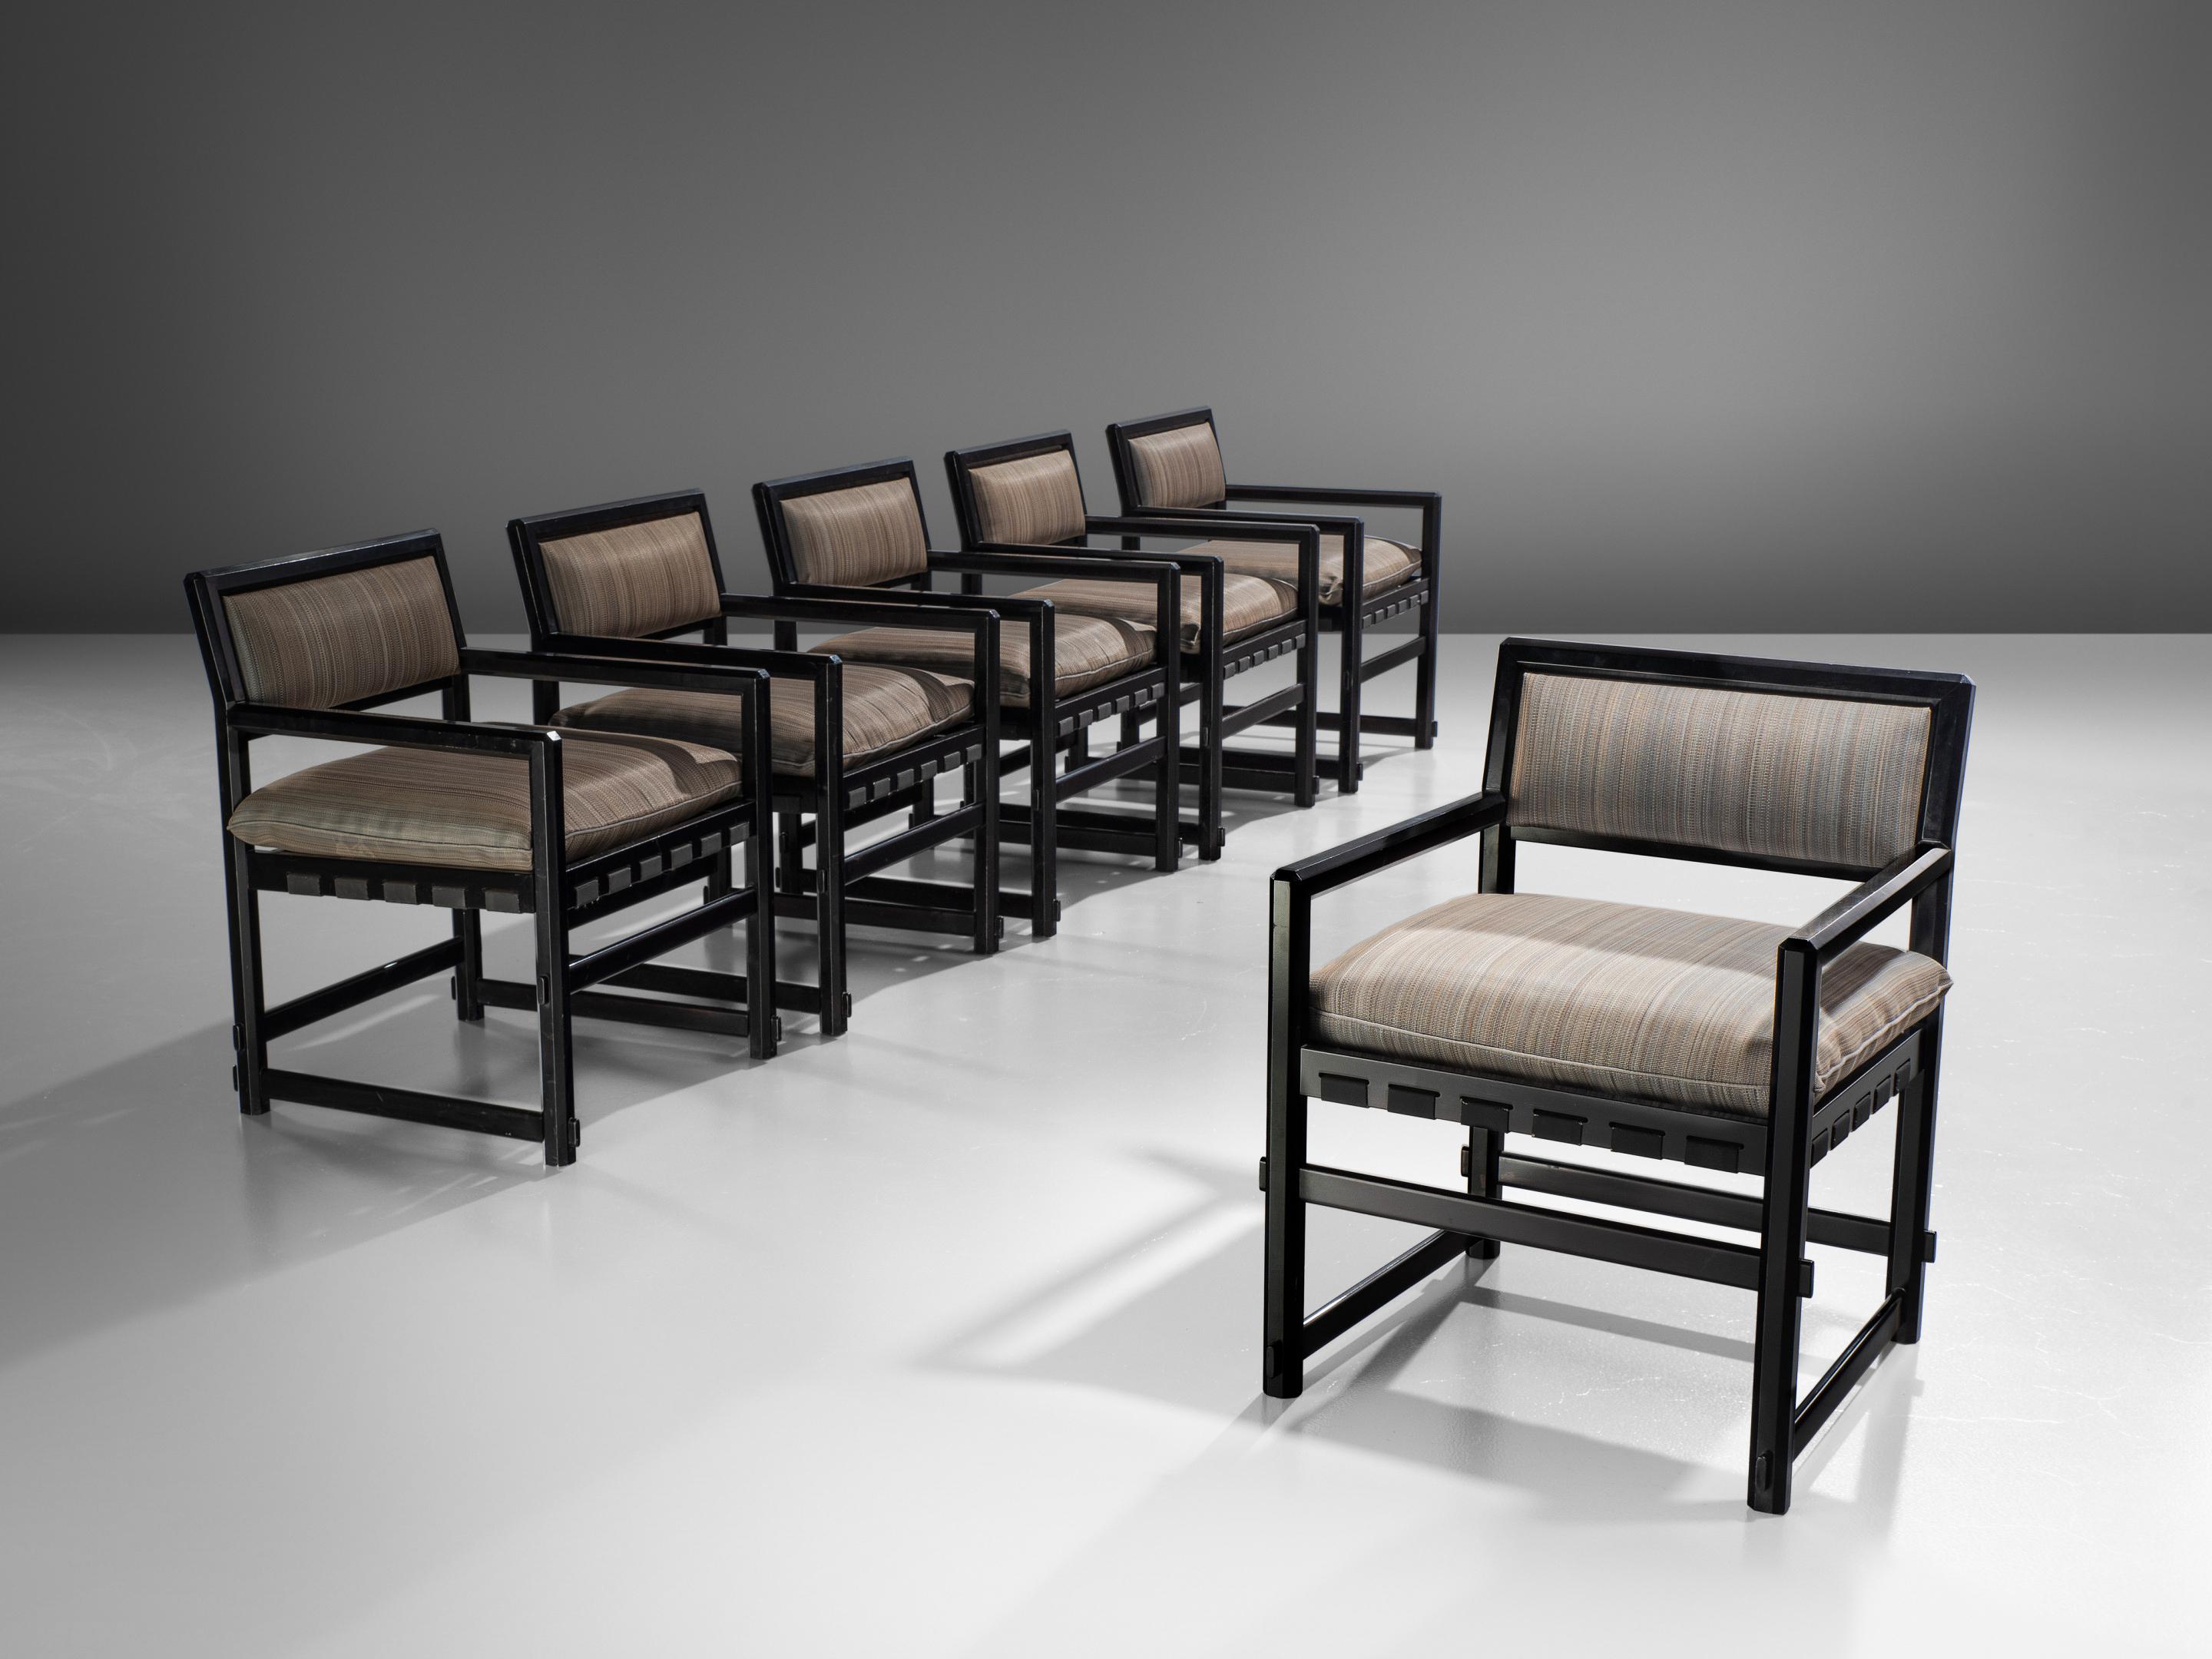 Edward Wormley for Dunbar executed by Mobilier Universel, Jules Wabbes, set of six armchairs, lacquered black wood and fabric, Belgium, 1960s.

This set of six grand armchairs is executed with a rare black lacquered frame and soft striped grey